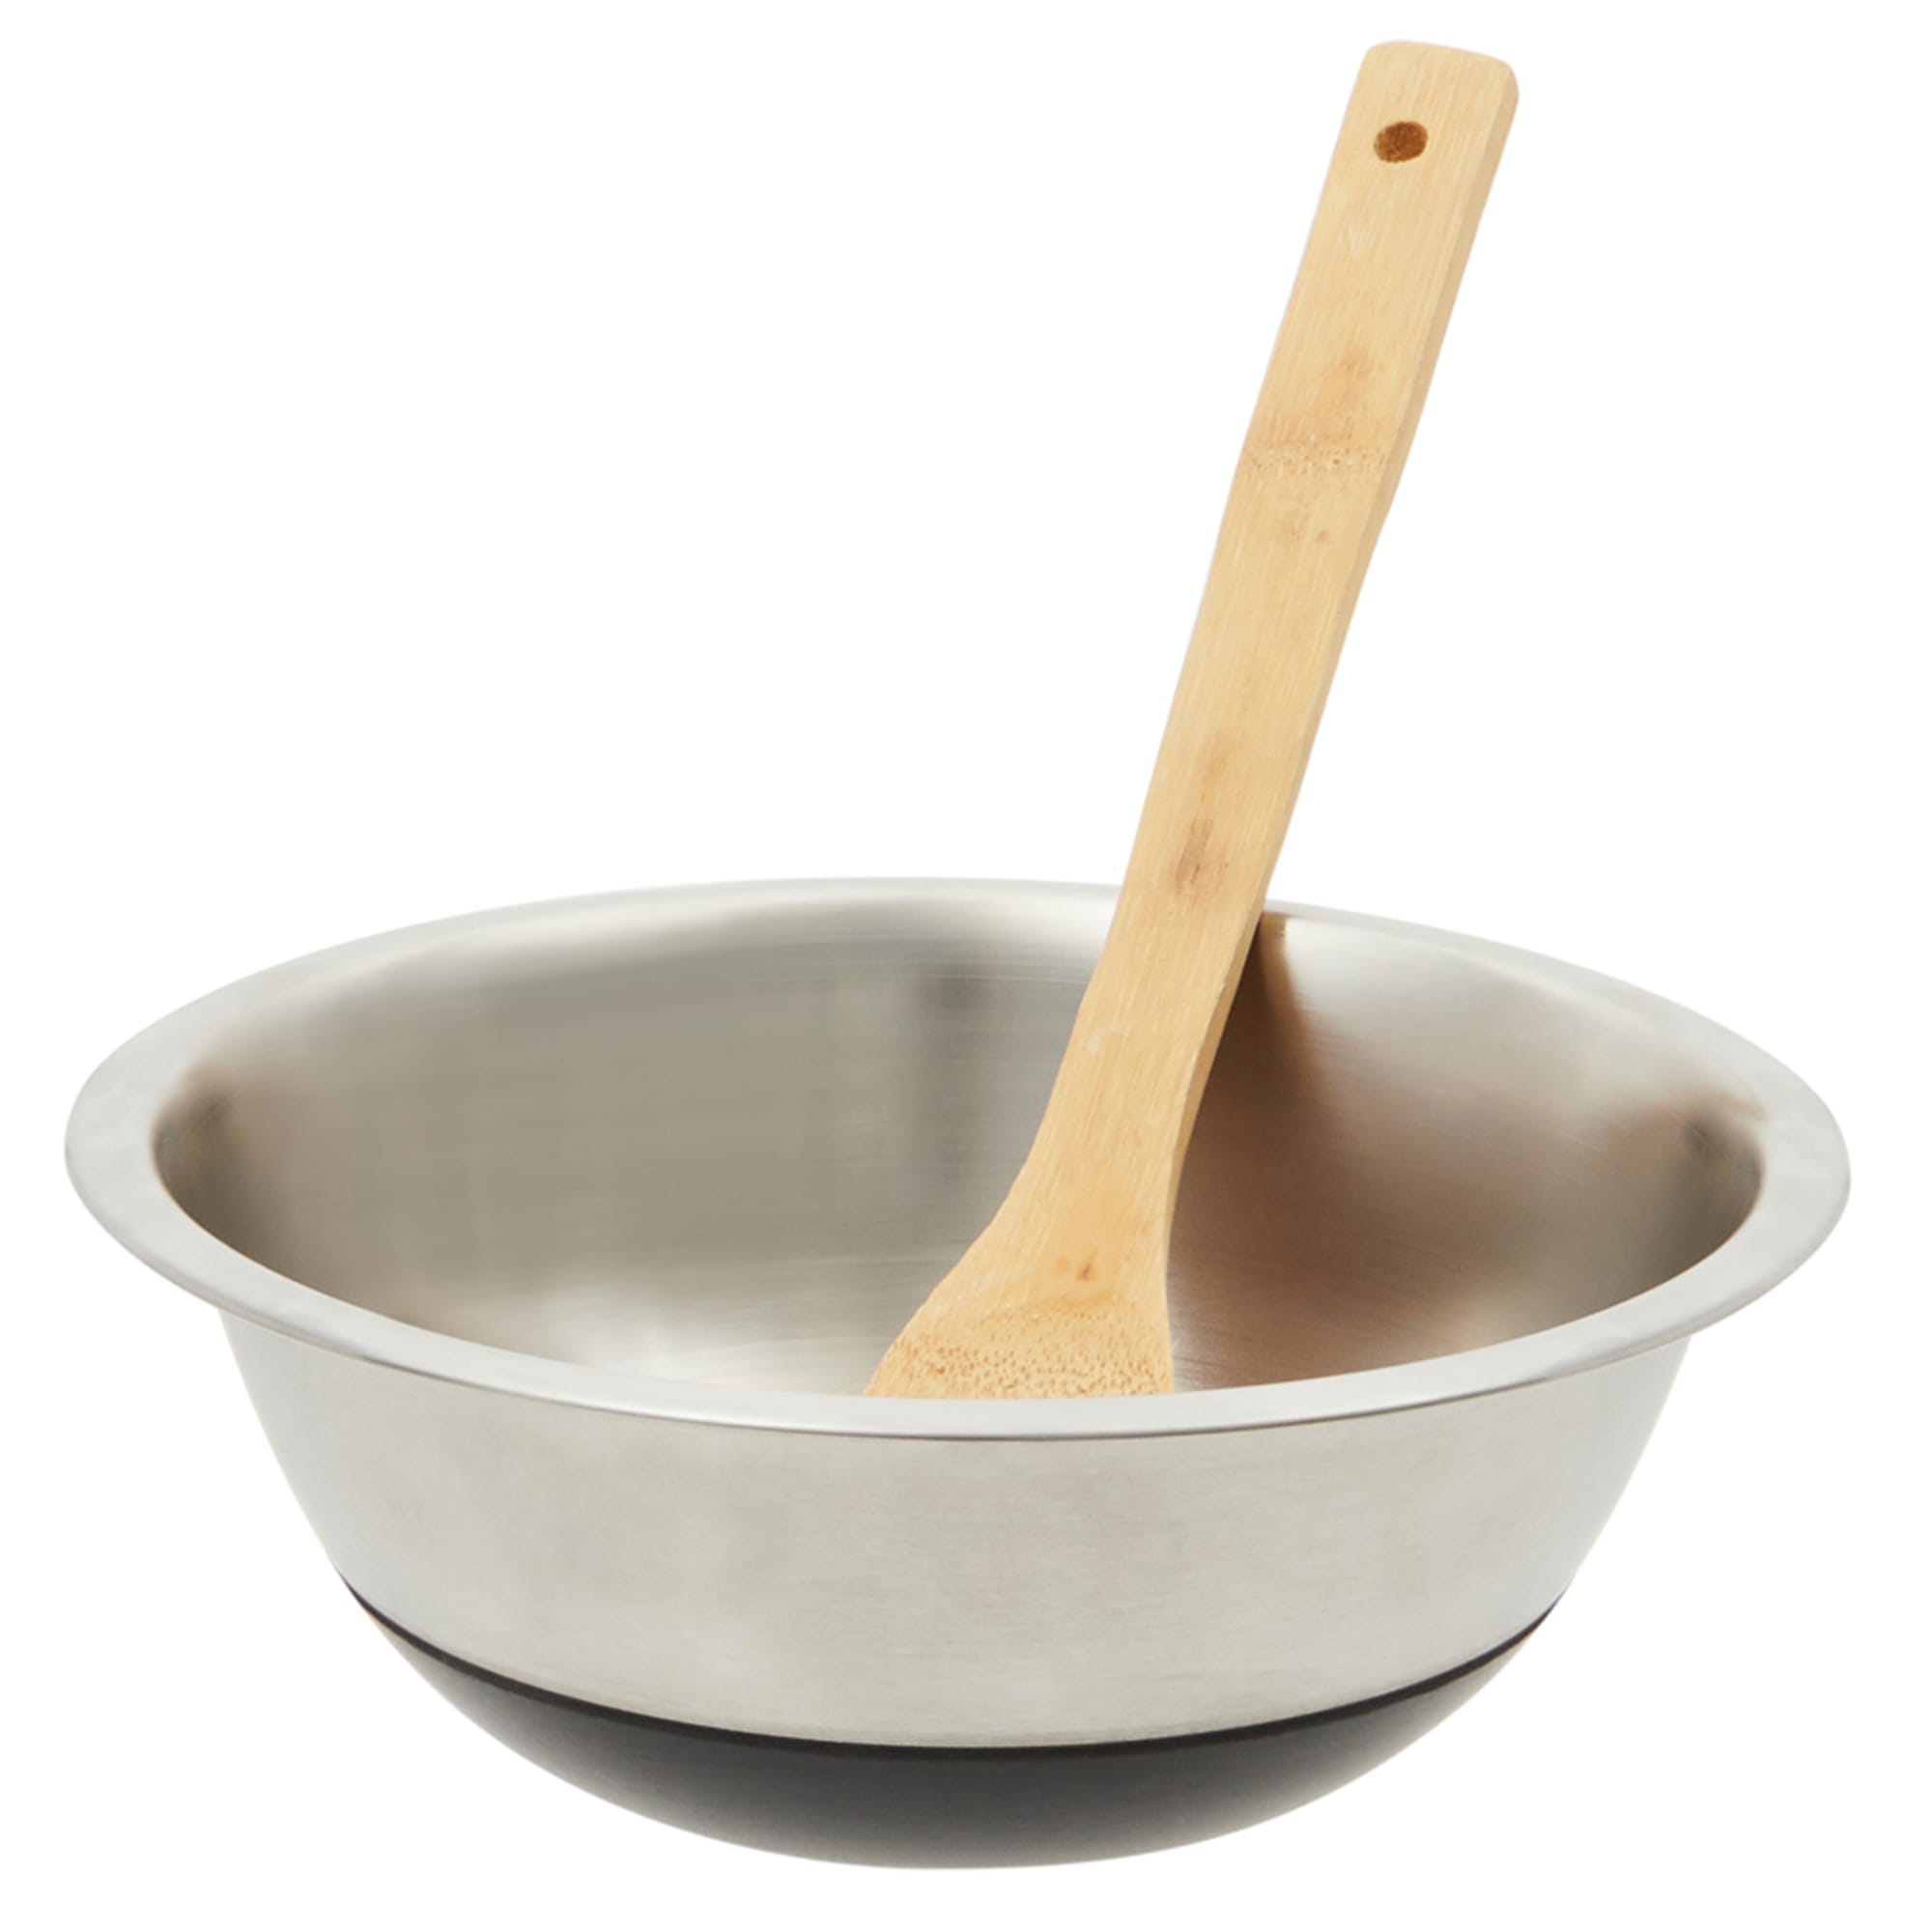 Home Basics Anti-Skid 2.5 Qt Stainless Steel Mixing Bowl $4.00 EACH, CASE PACK OF 12